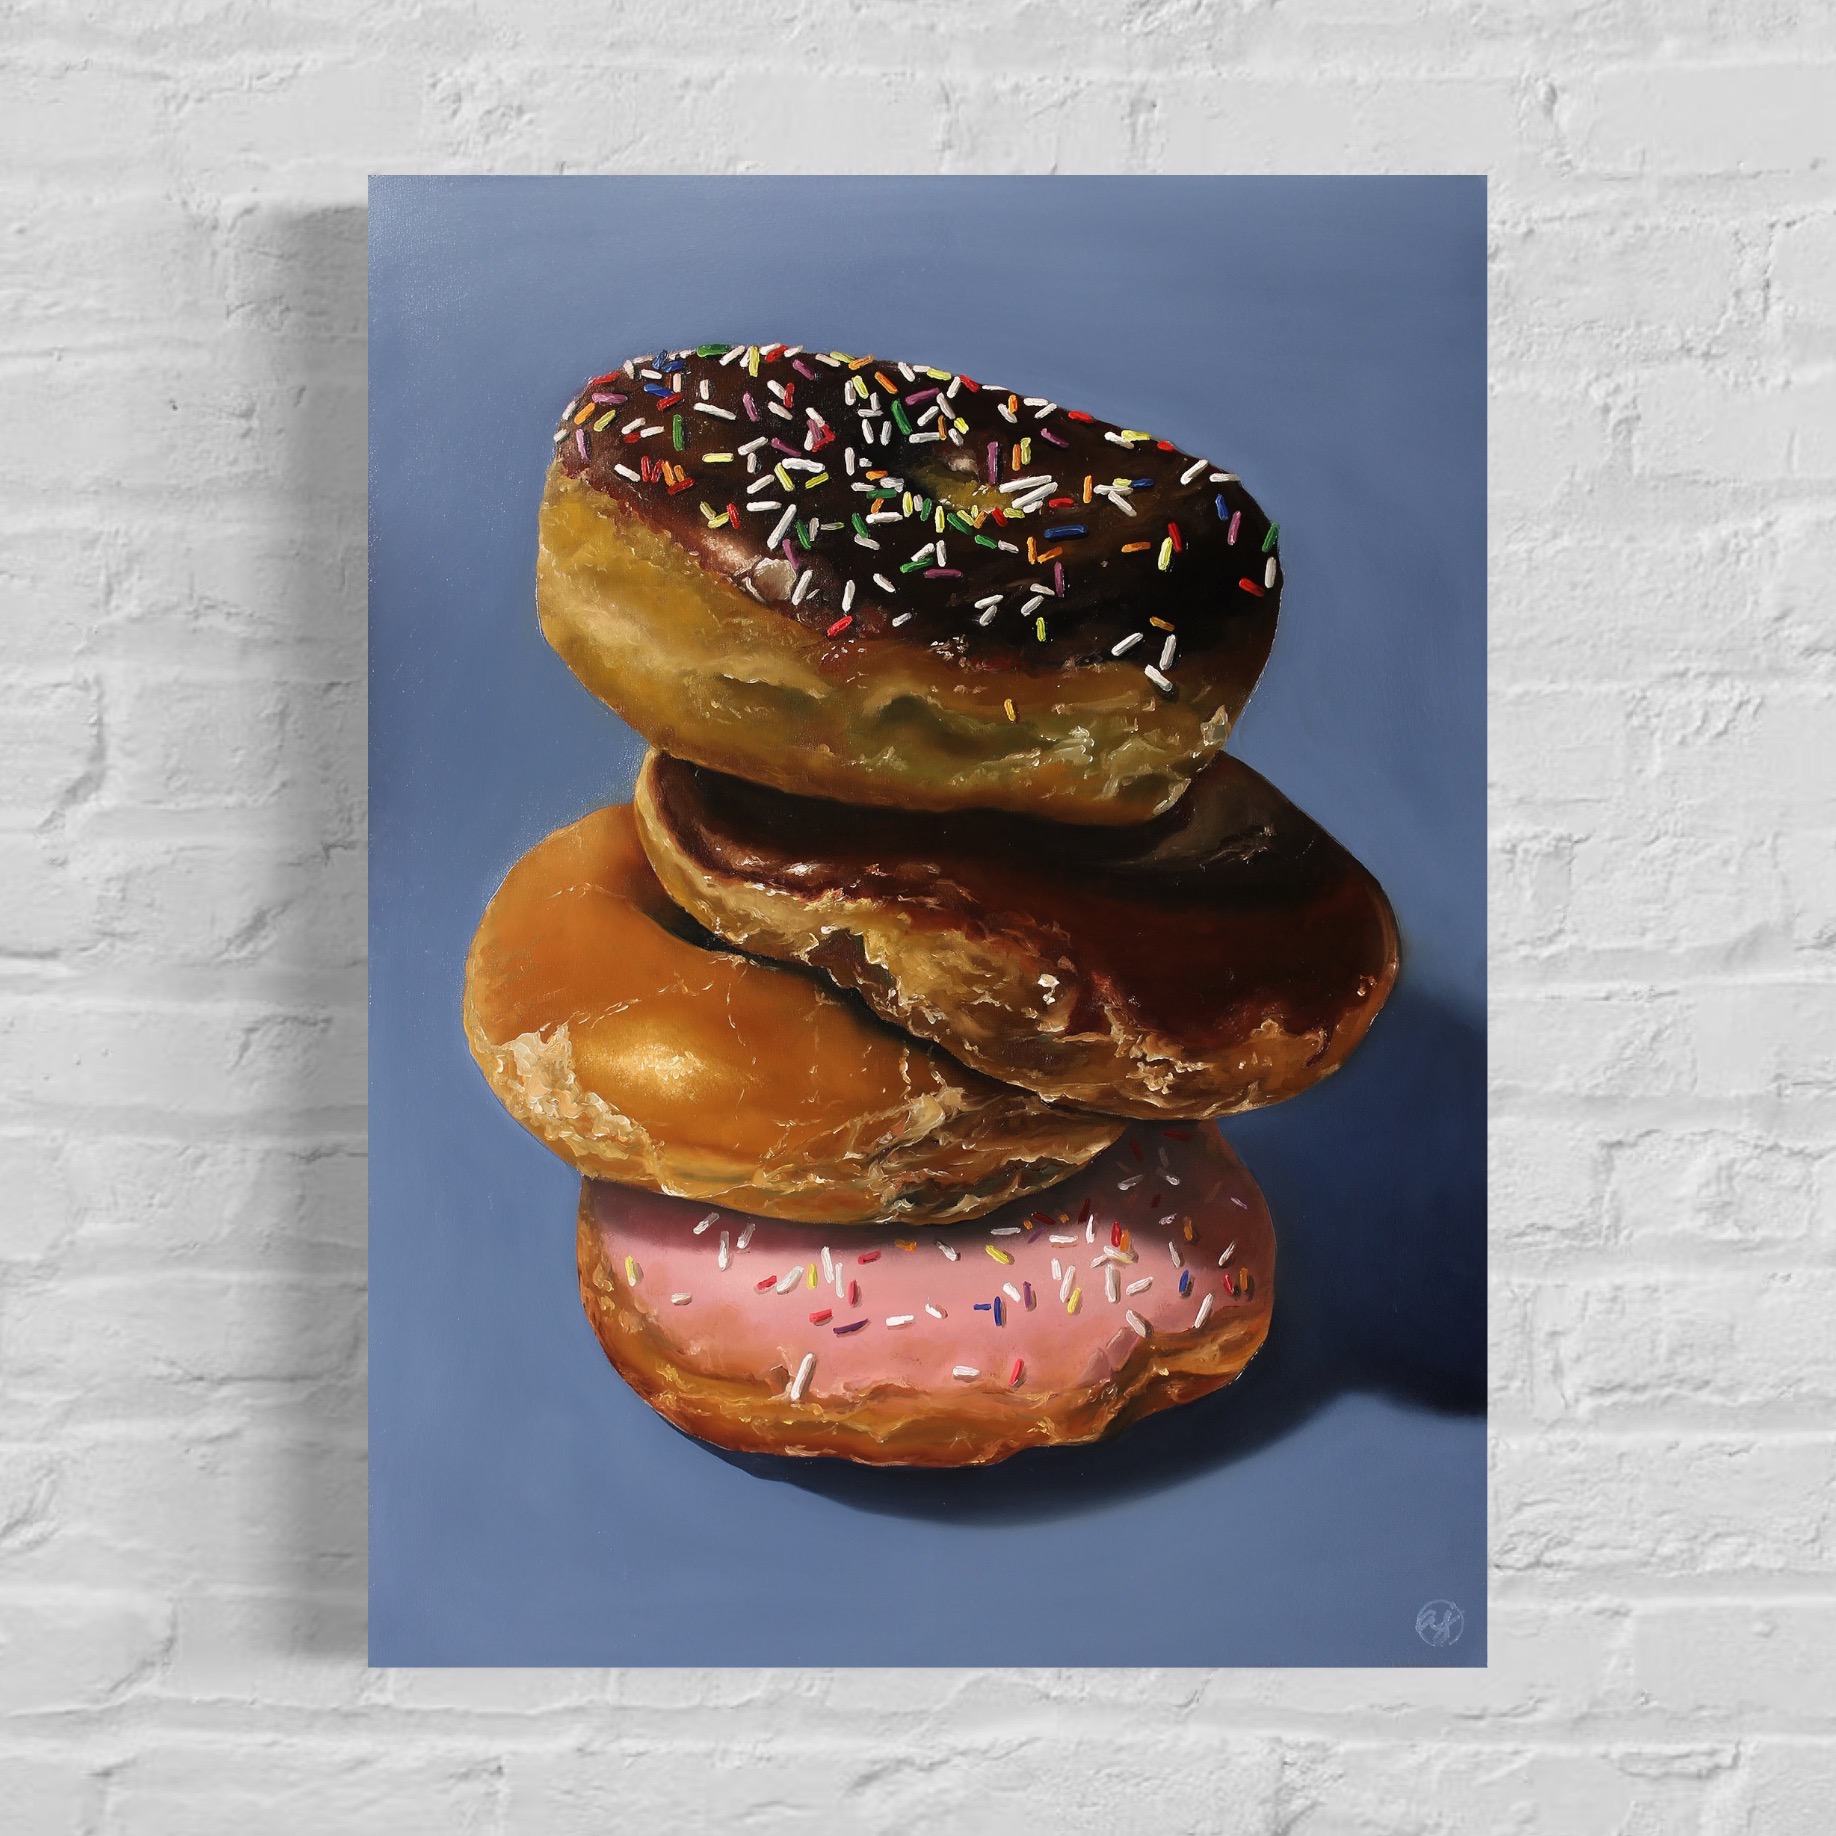 "Donut Stack" 18x24 Original Oil Painting by Abra Johnson